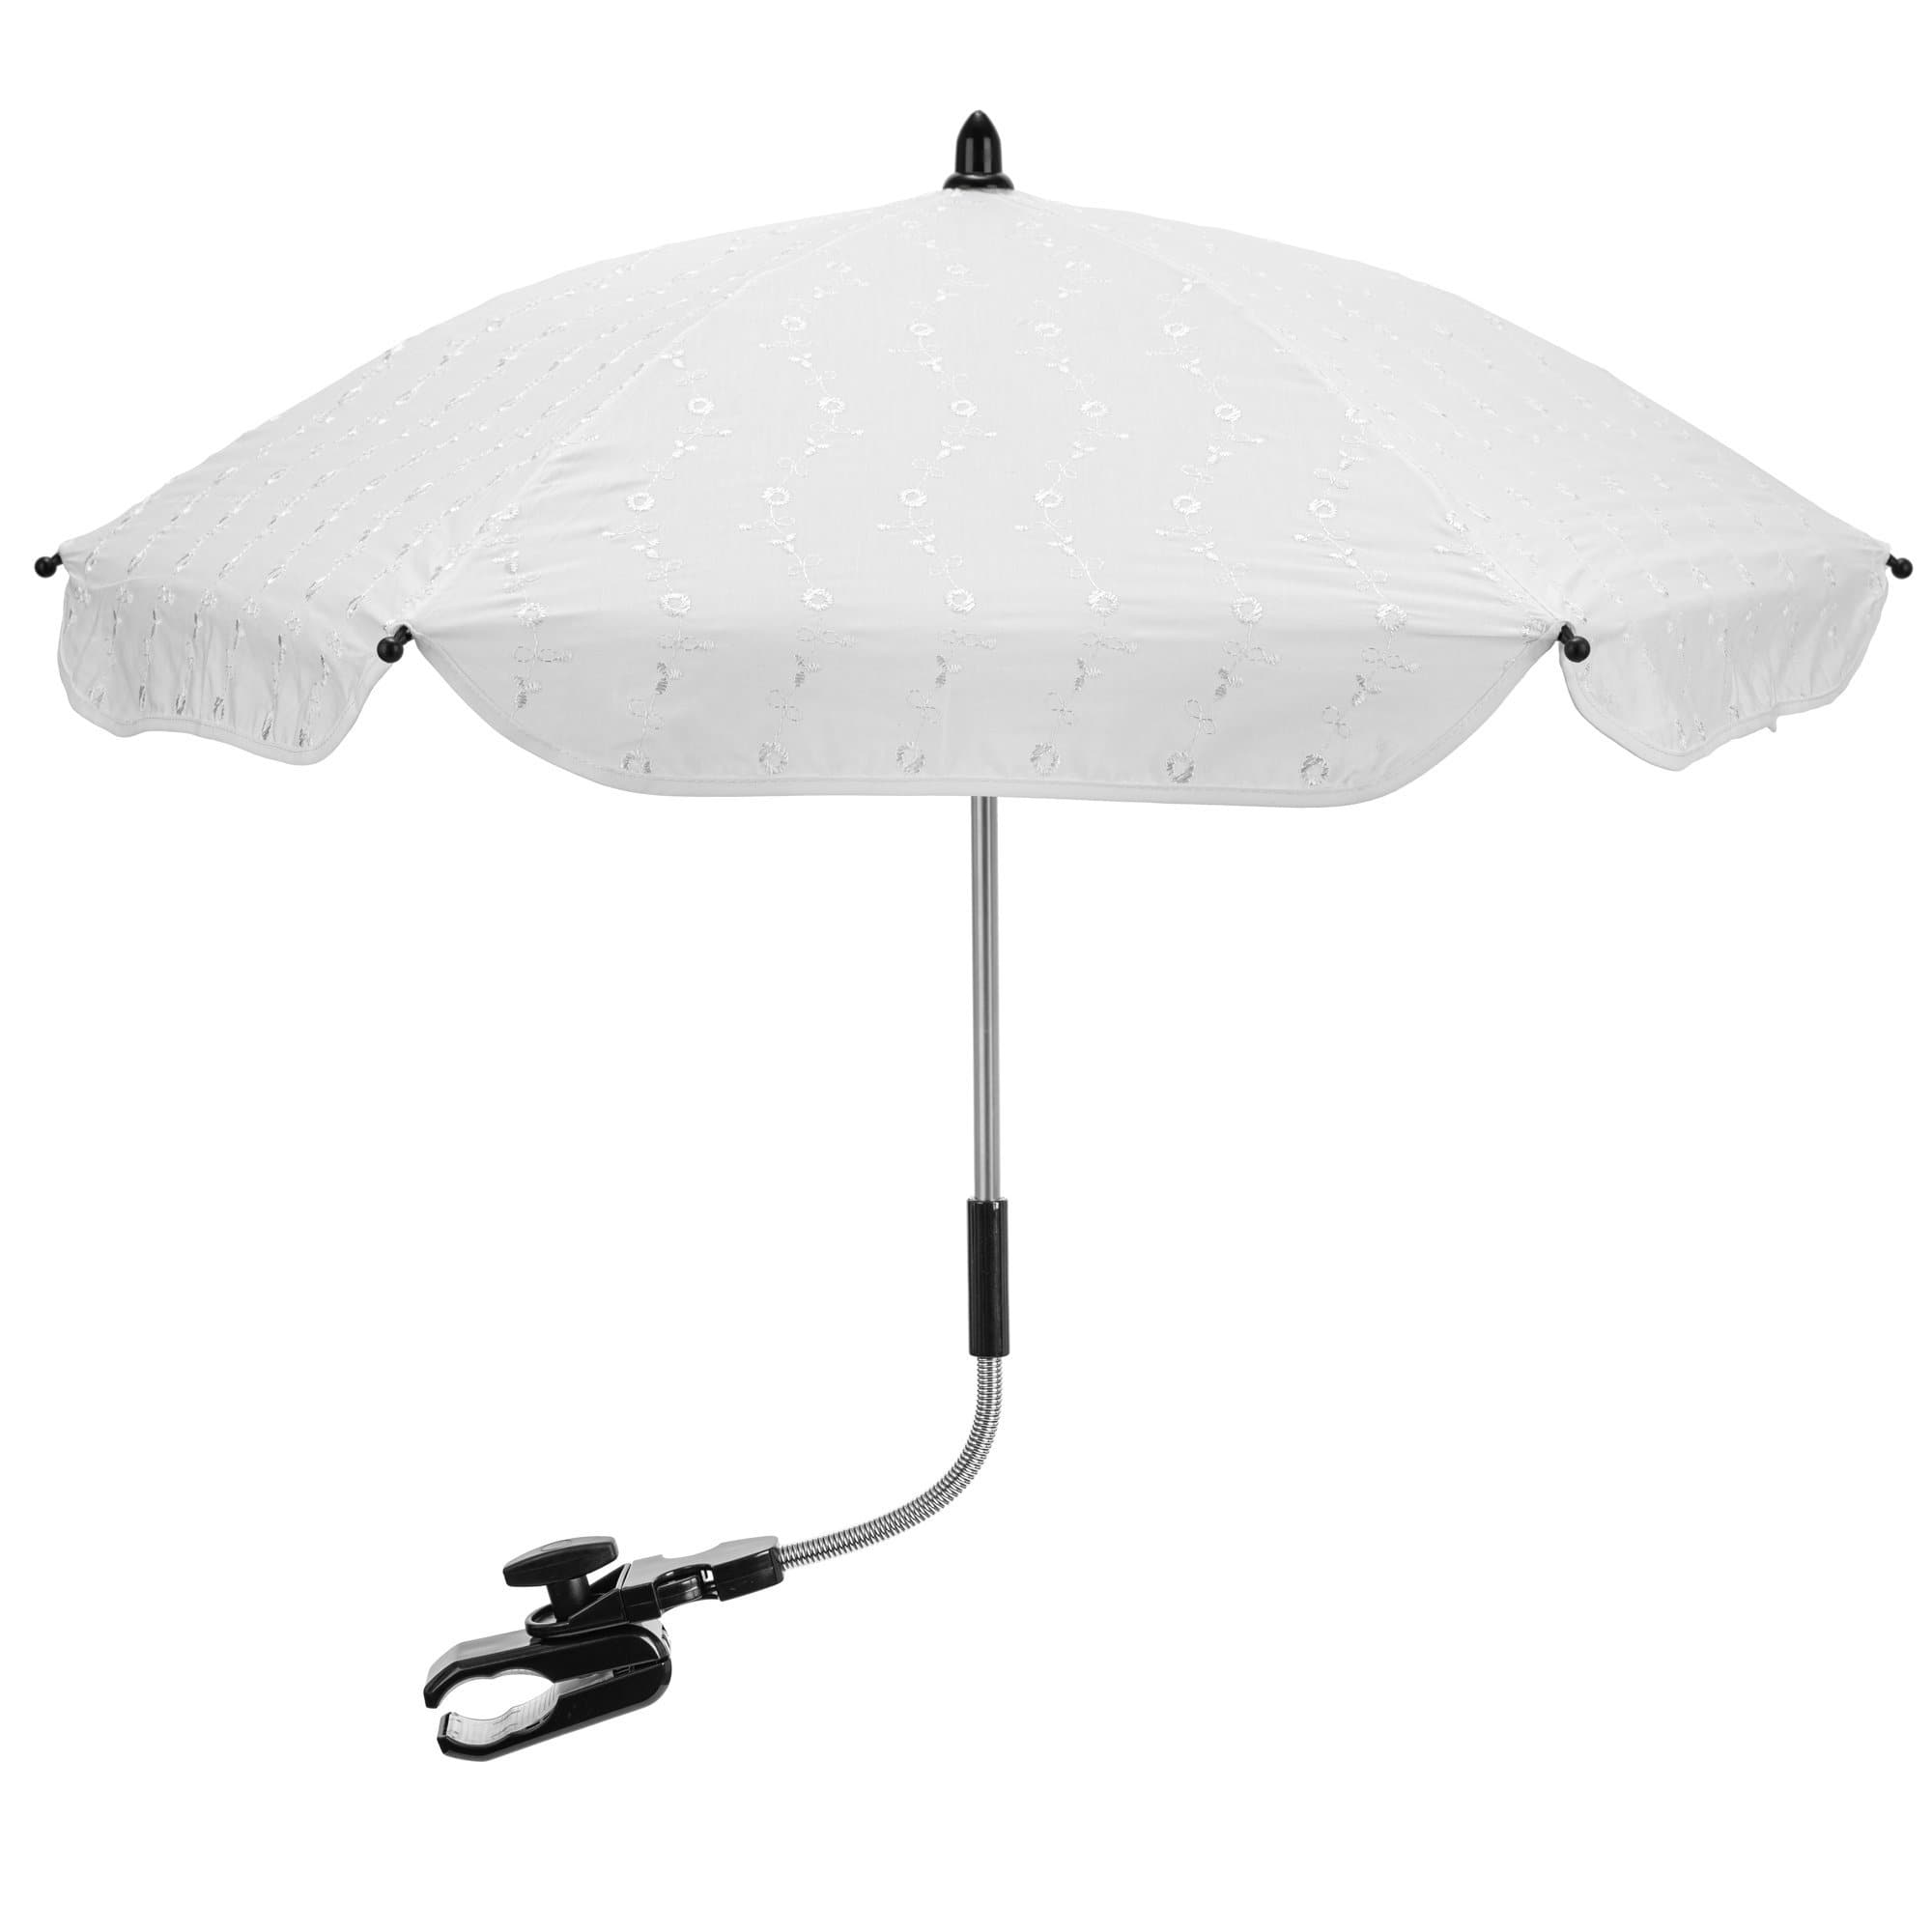 Broderie Anglaise Parasol Compatible with Babyzen - White / Fits All Models | For Your Little One